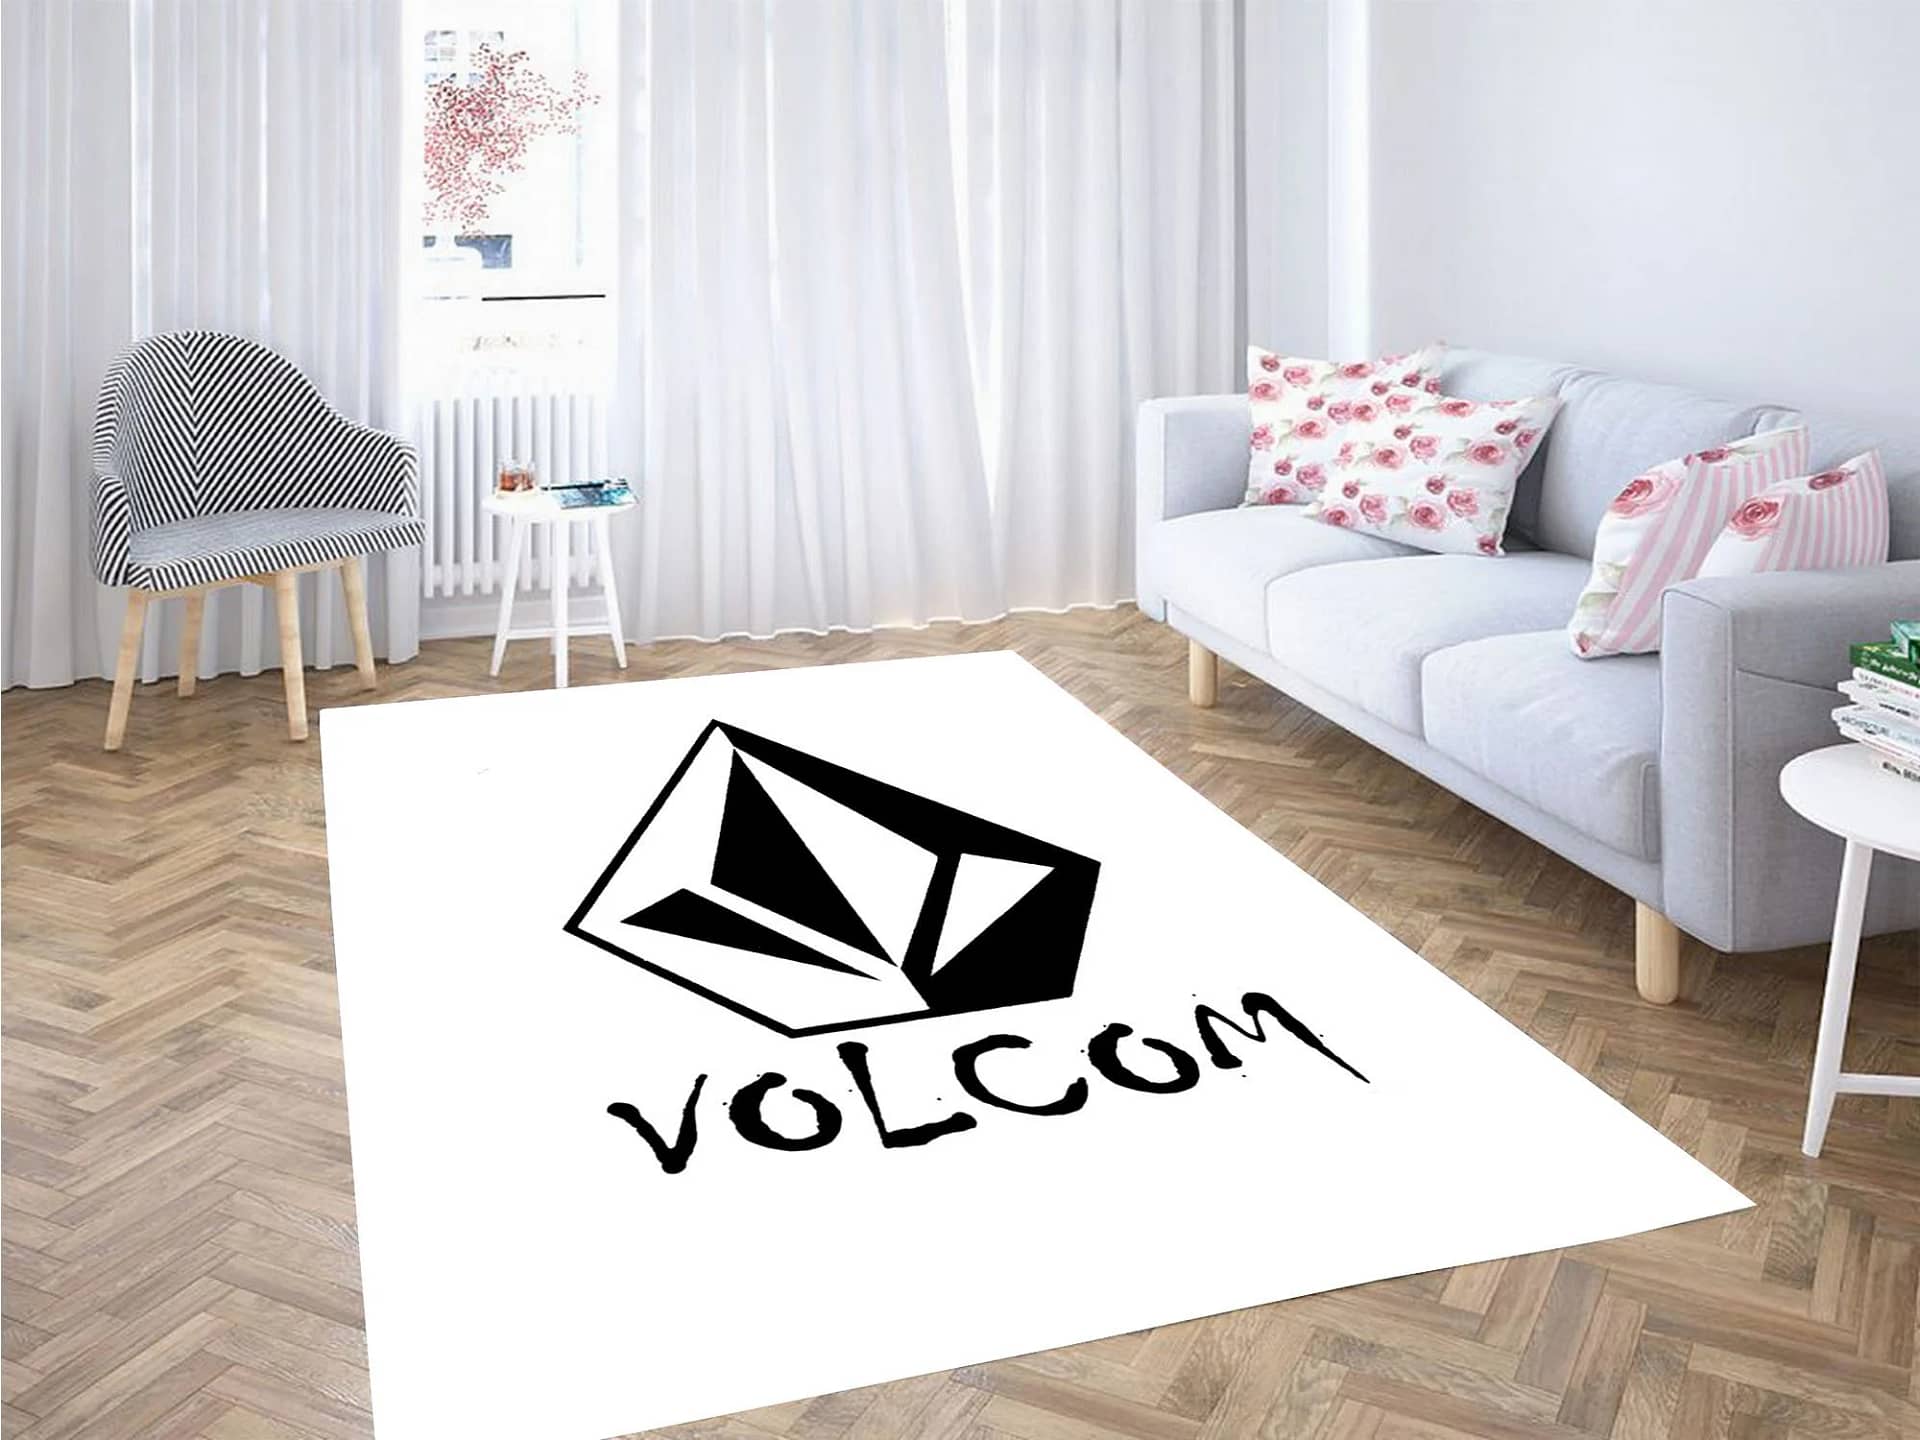 Another Font Volco Skatewear Fashion Carpet Rug